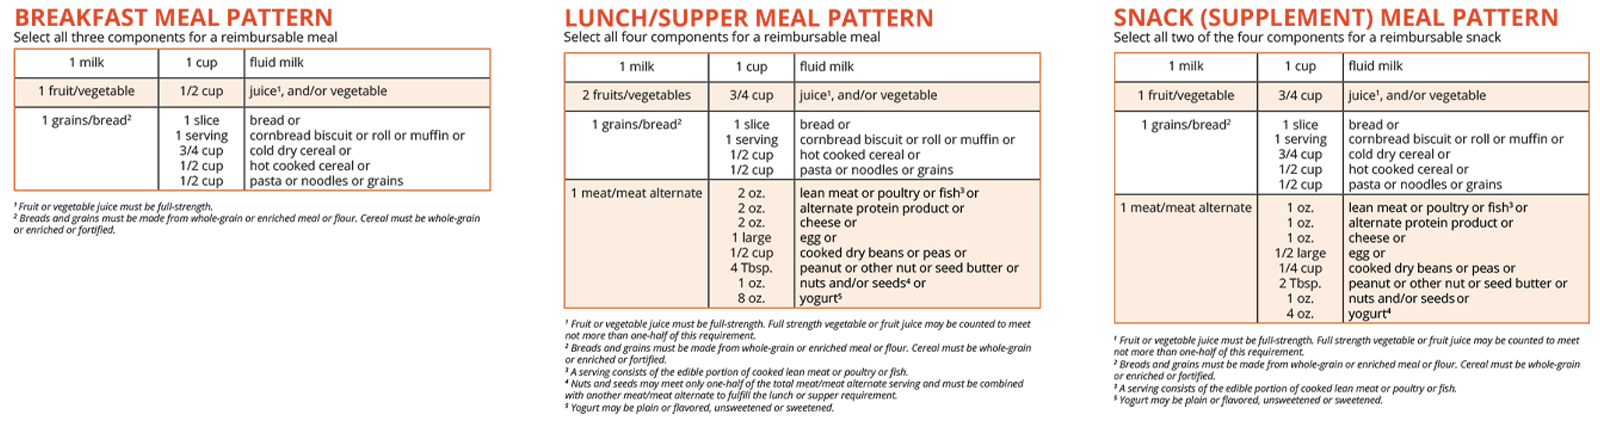 SFSP Meal Patterns